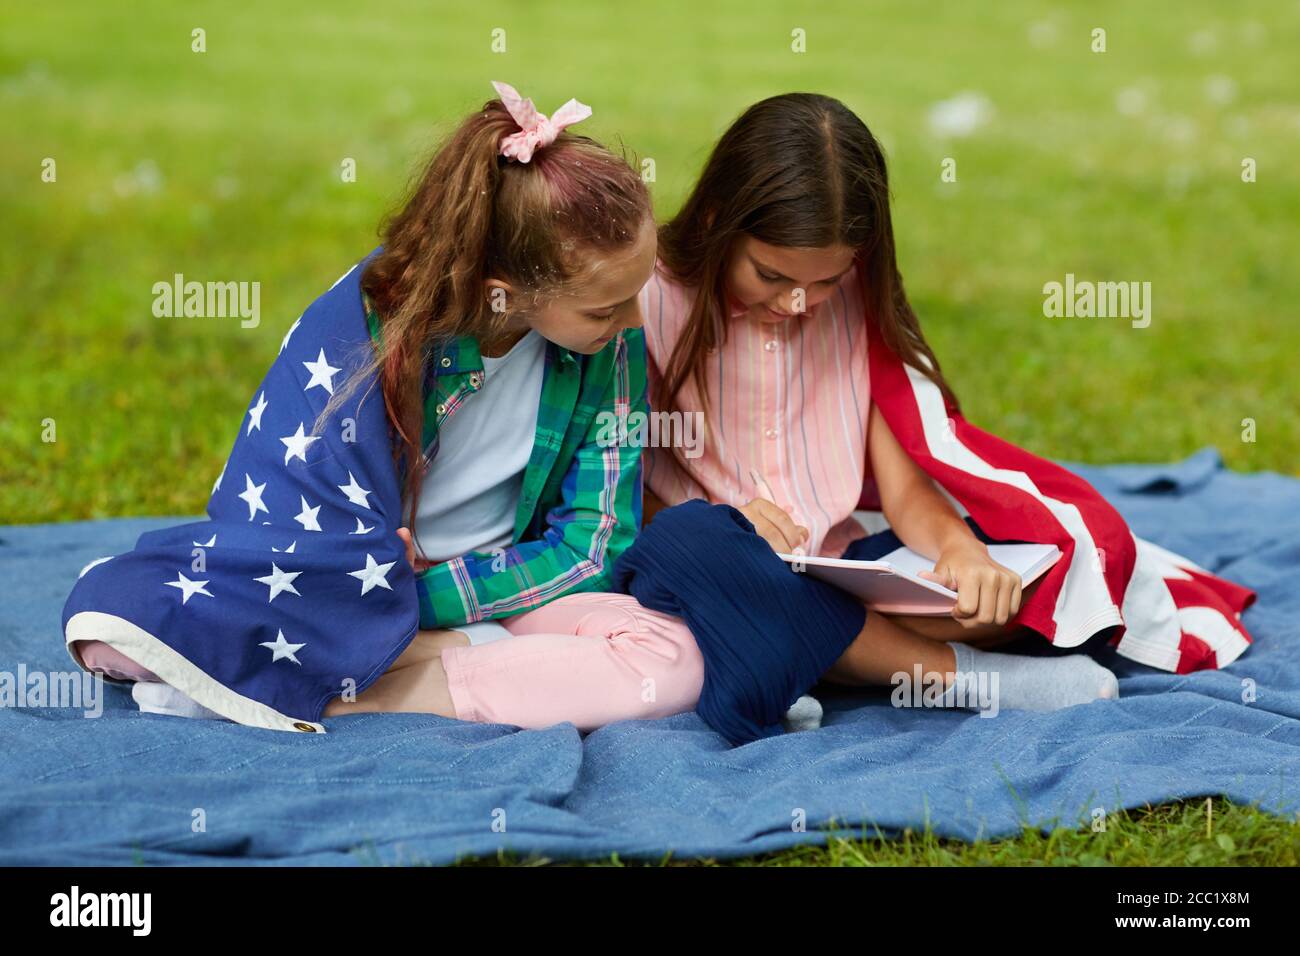 Full length portrait of two cute girls covered by American flag sitting on picnic blanket in park and reading book, copy space Stock Photo